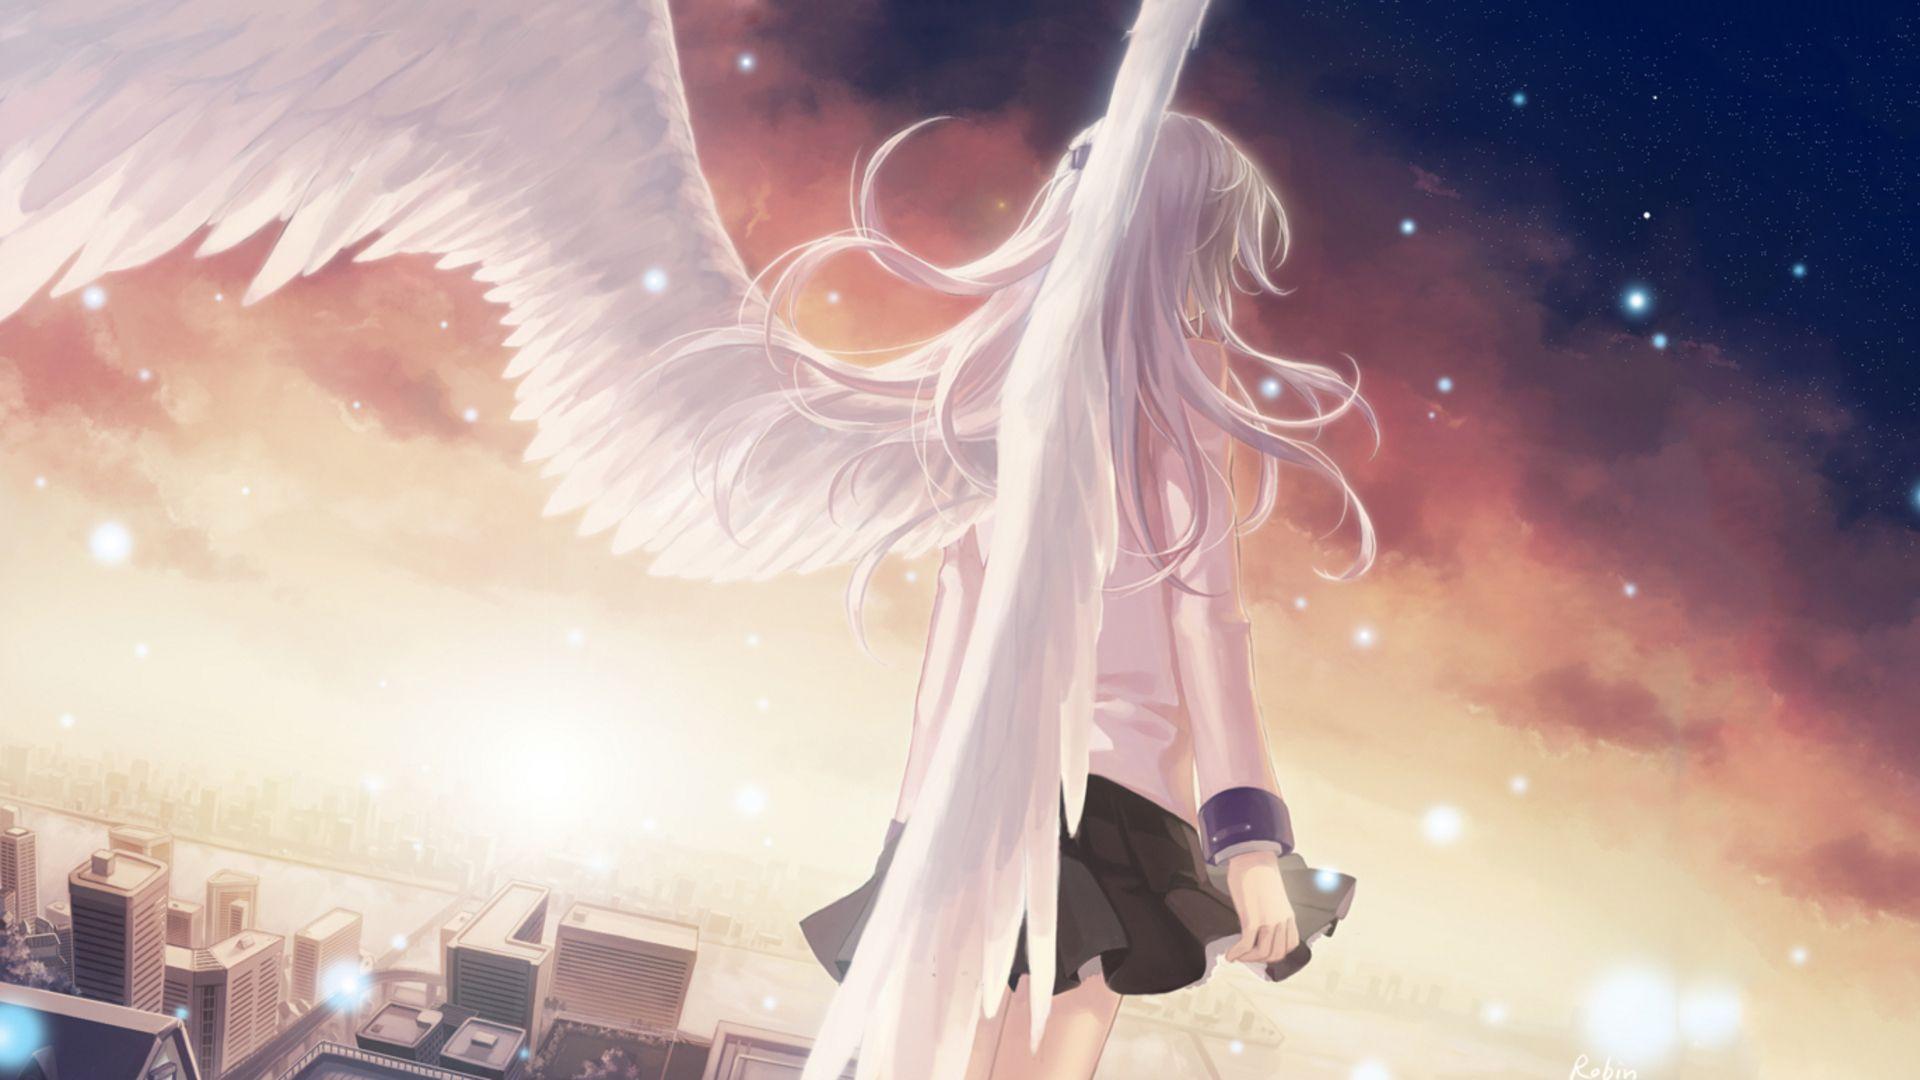 Wallpaper.wiki Background Anime Angel Beats PIC WPE0012336